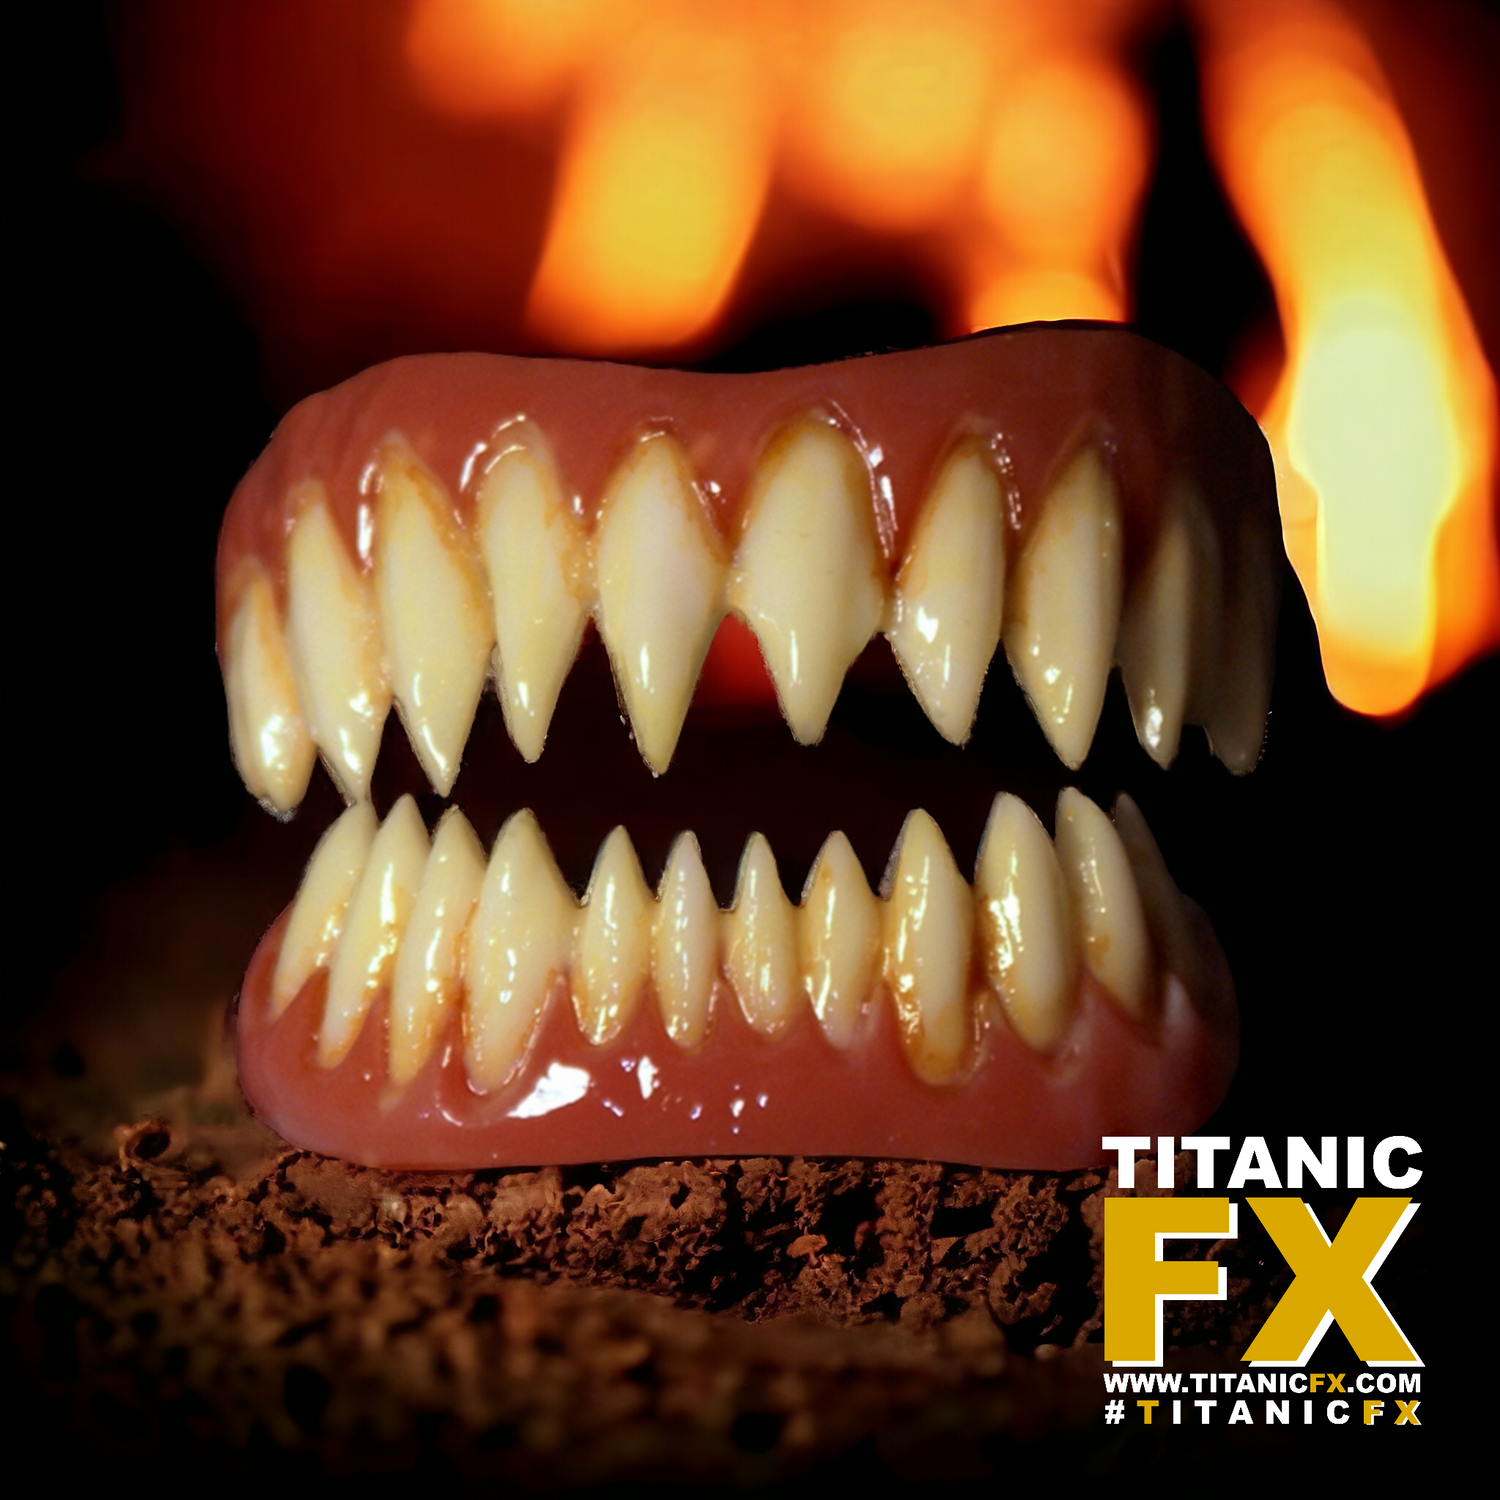 Dental Distortions | 'Pennywise' FX Fangs